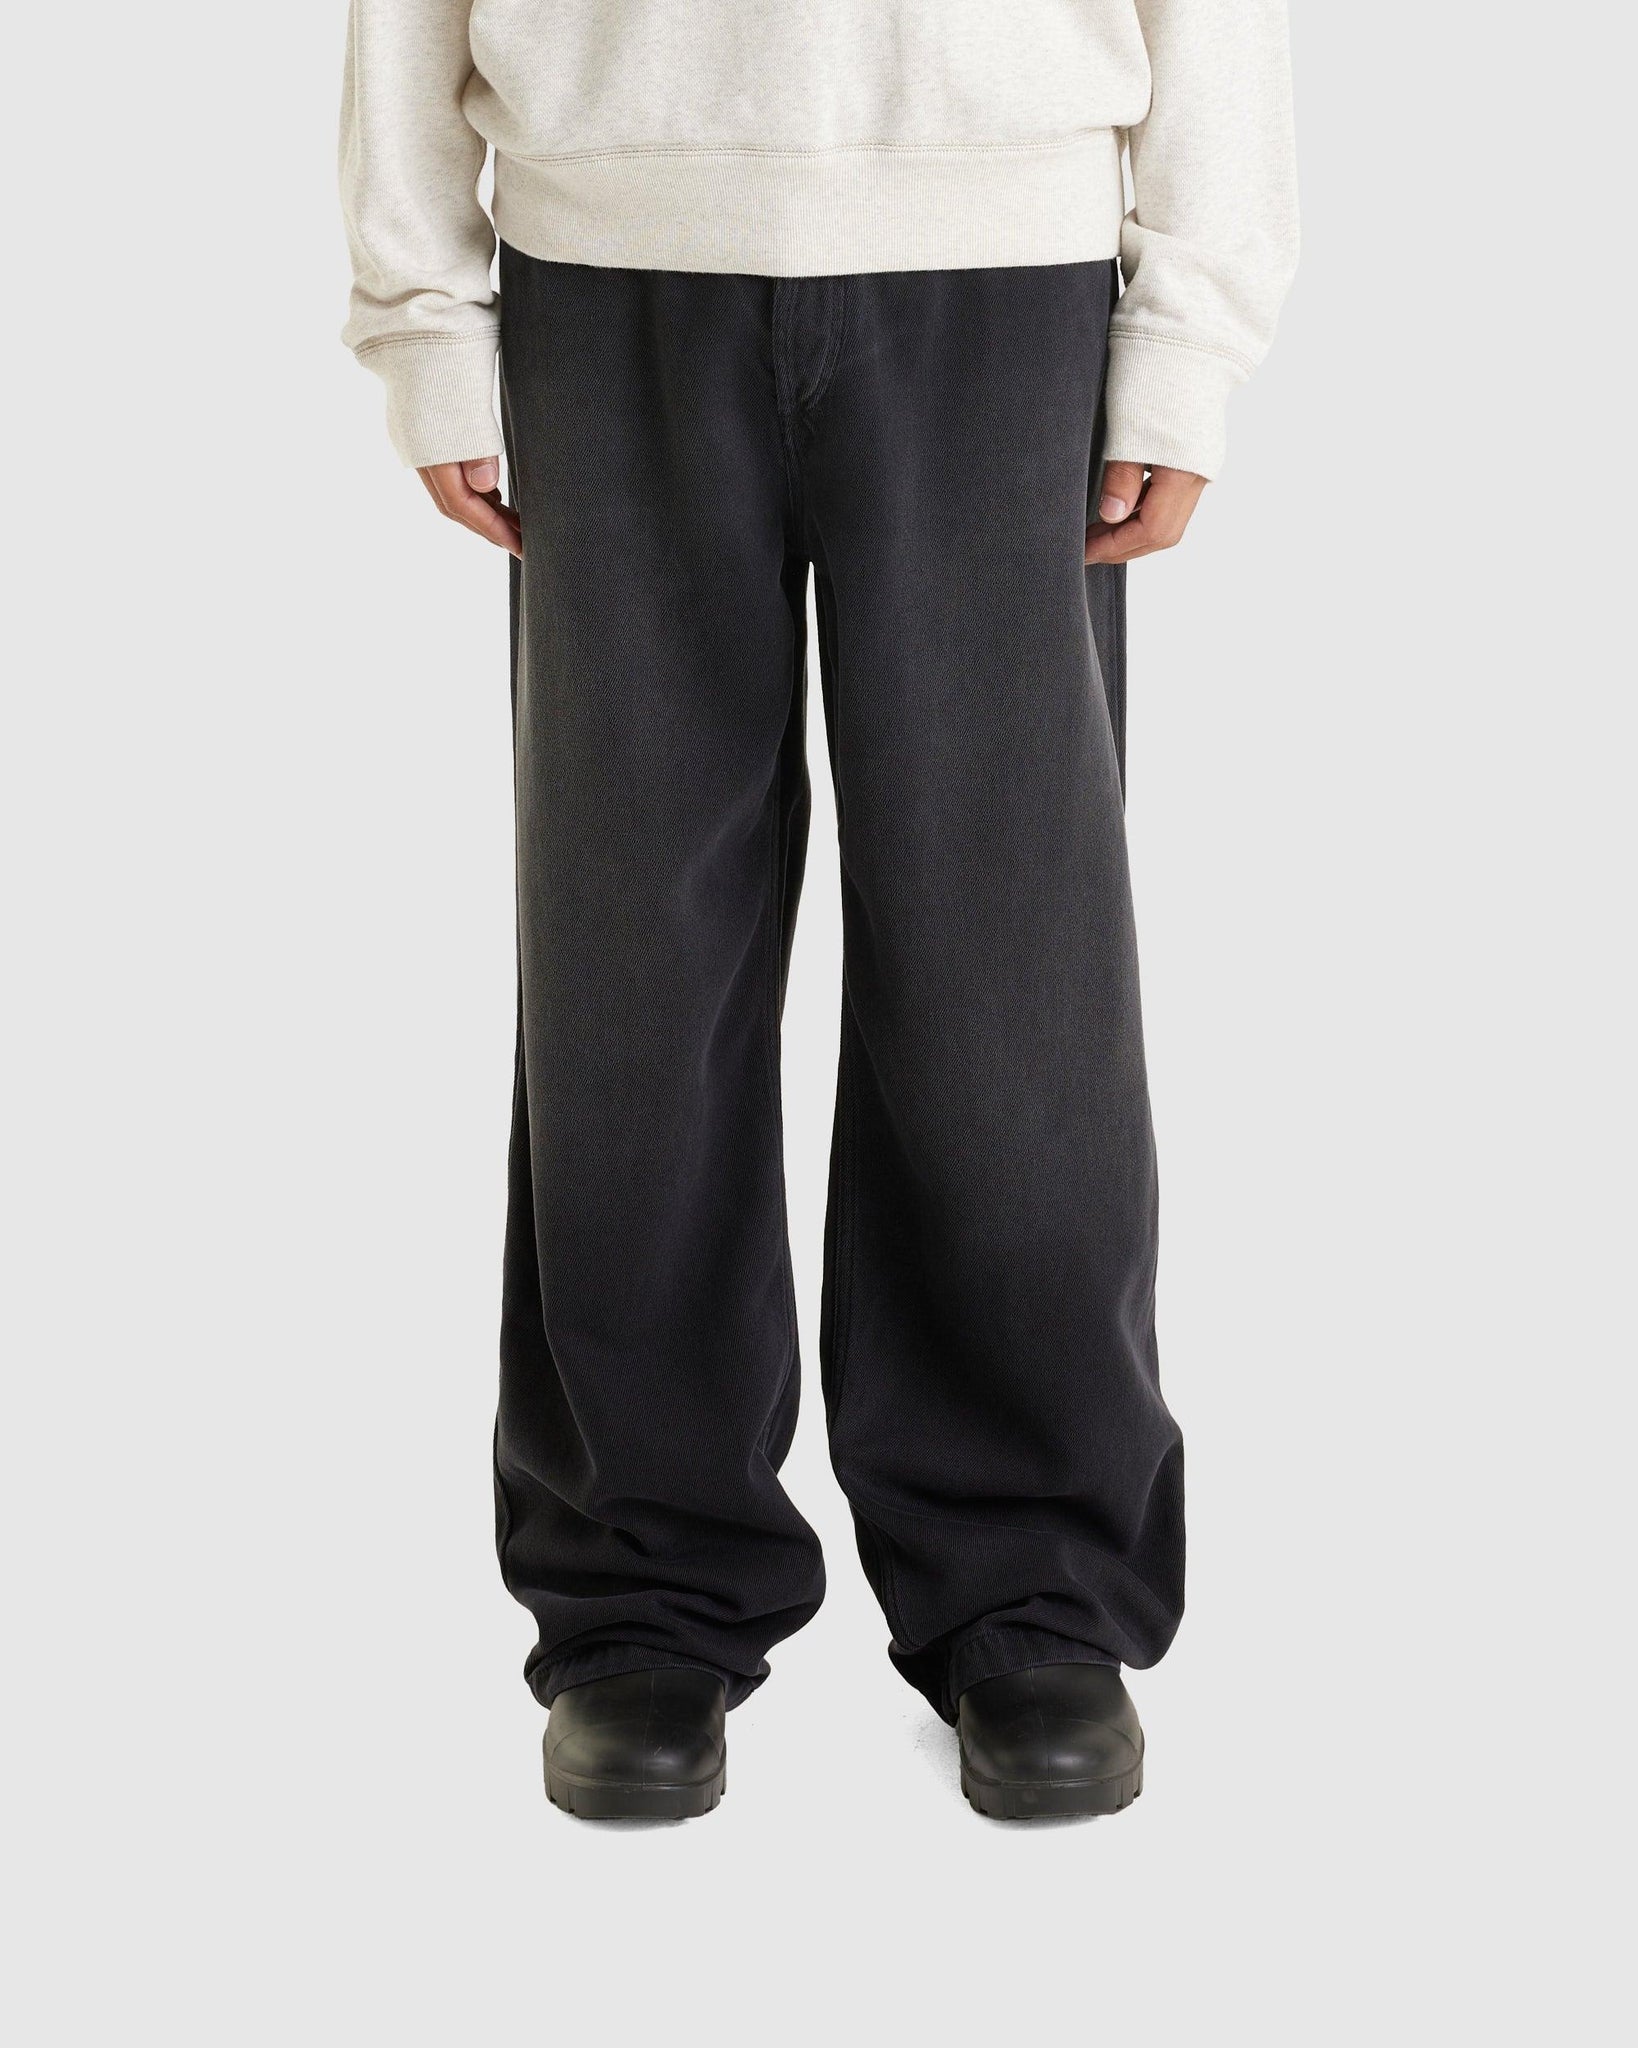 Teren Pants - {{ collection.title }} - Chinatown Country Club 